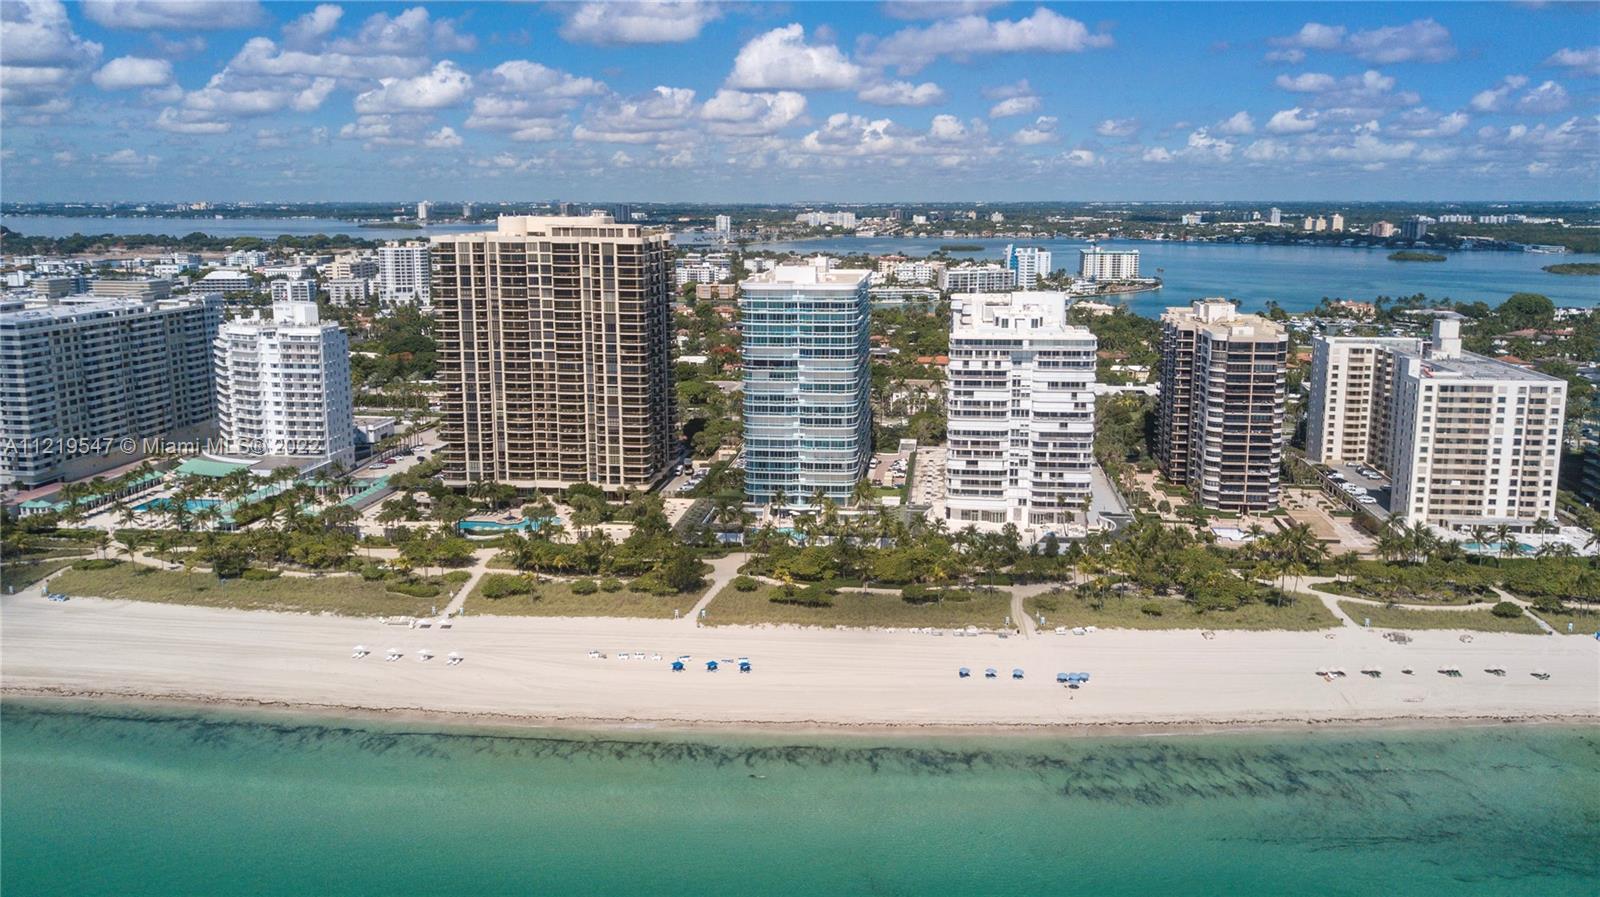 Great ocean views from this magnificent unit at the coveted Bal Harbour 101 Condominium! This oceanfront home boasts 3,340 square feet of interior space and 3 bedrooms plus den with closets (practically, a 4th bedroom!) and 3.5 bathrooms. Floor to ceiling glass doors and windows overlooking the Bay Harbor canal and the Atlantic Ocean from spacious terrace and from every room. Fabulous master suite features oversized walk-in closets and more. Step down to the beach or walk to Bal Harbour Shops. The building was recently completely renovated. Enjoy luxury beachfront living w/24 hour valet, pool, state of the art gym, on site restaurant, hotel rooms, social room and beach service. Virtual tour available and online appointments!